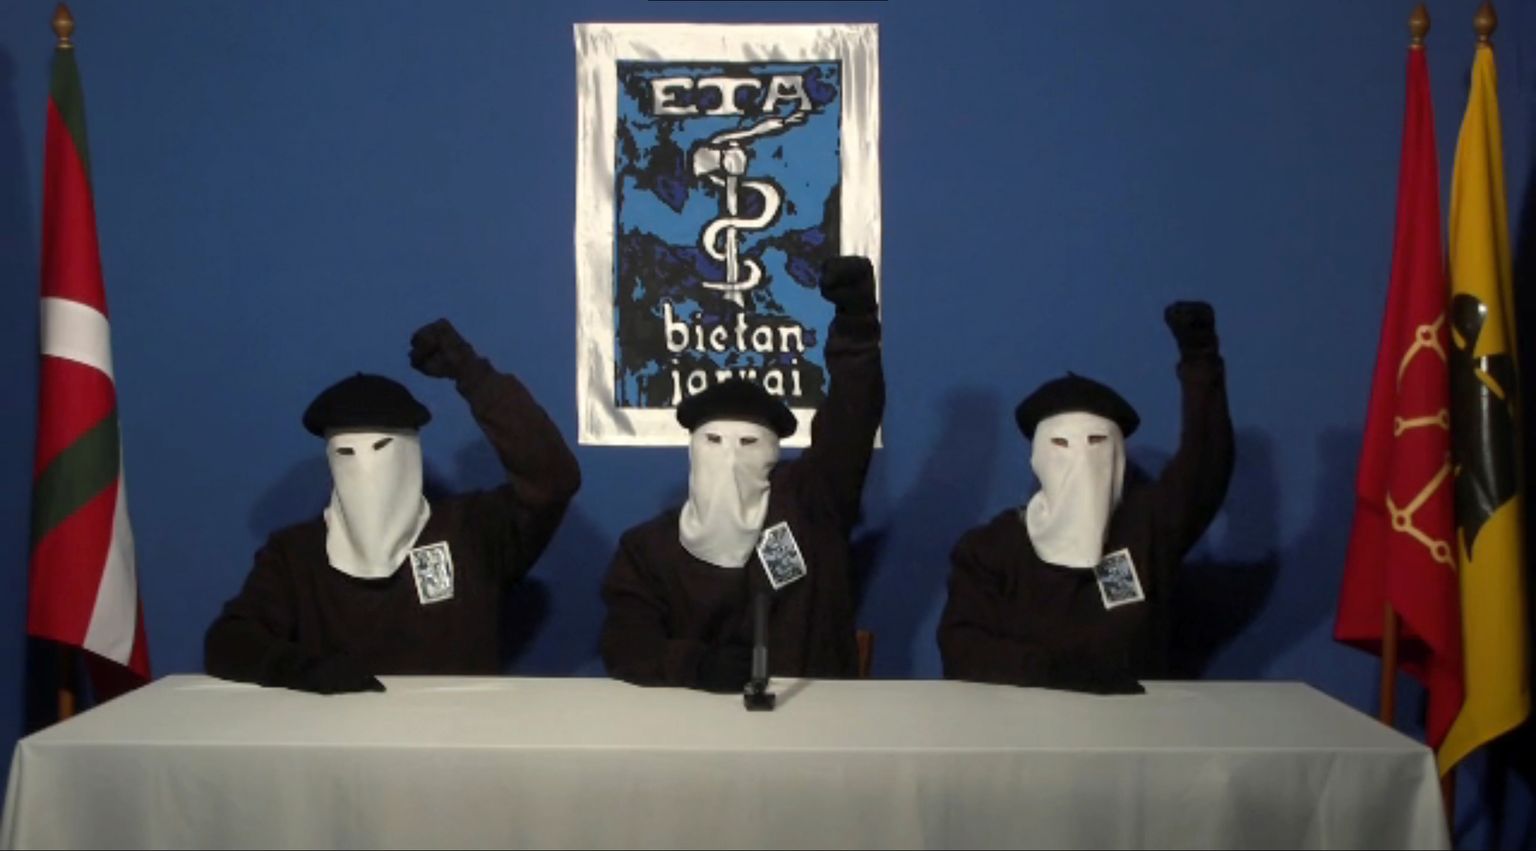 FILE PHOTO: Three members of Basque separatist group ETA call for a definitive end to 50 years of armed struggle, which has cost the lives of at least 850 people, in this still image taken from an undated video published on the website of Basque language newspaper Gara October 20, 2011. REUTERS/Gara/Handout/File Photo    ATTENTION EDITORS - THIS IMAGE WAS PROVIDED BY A THIRD PARTY. MANDATORY CREDIT